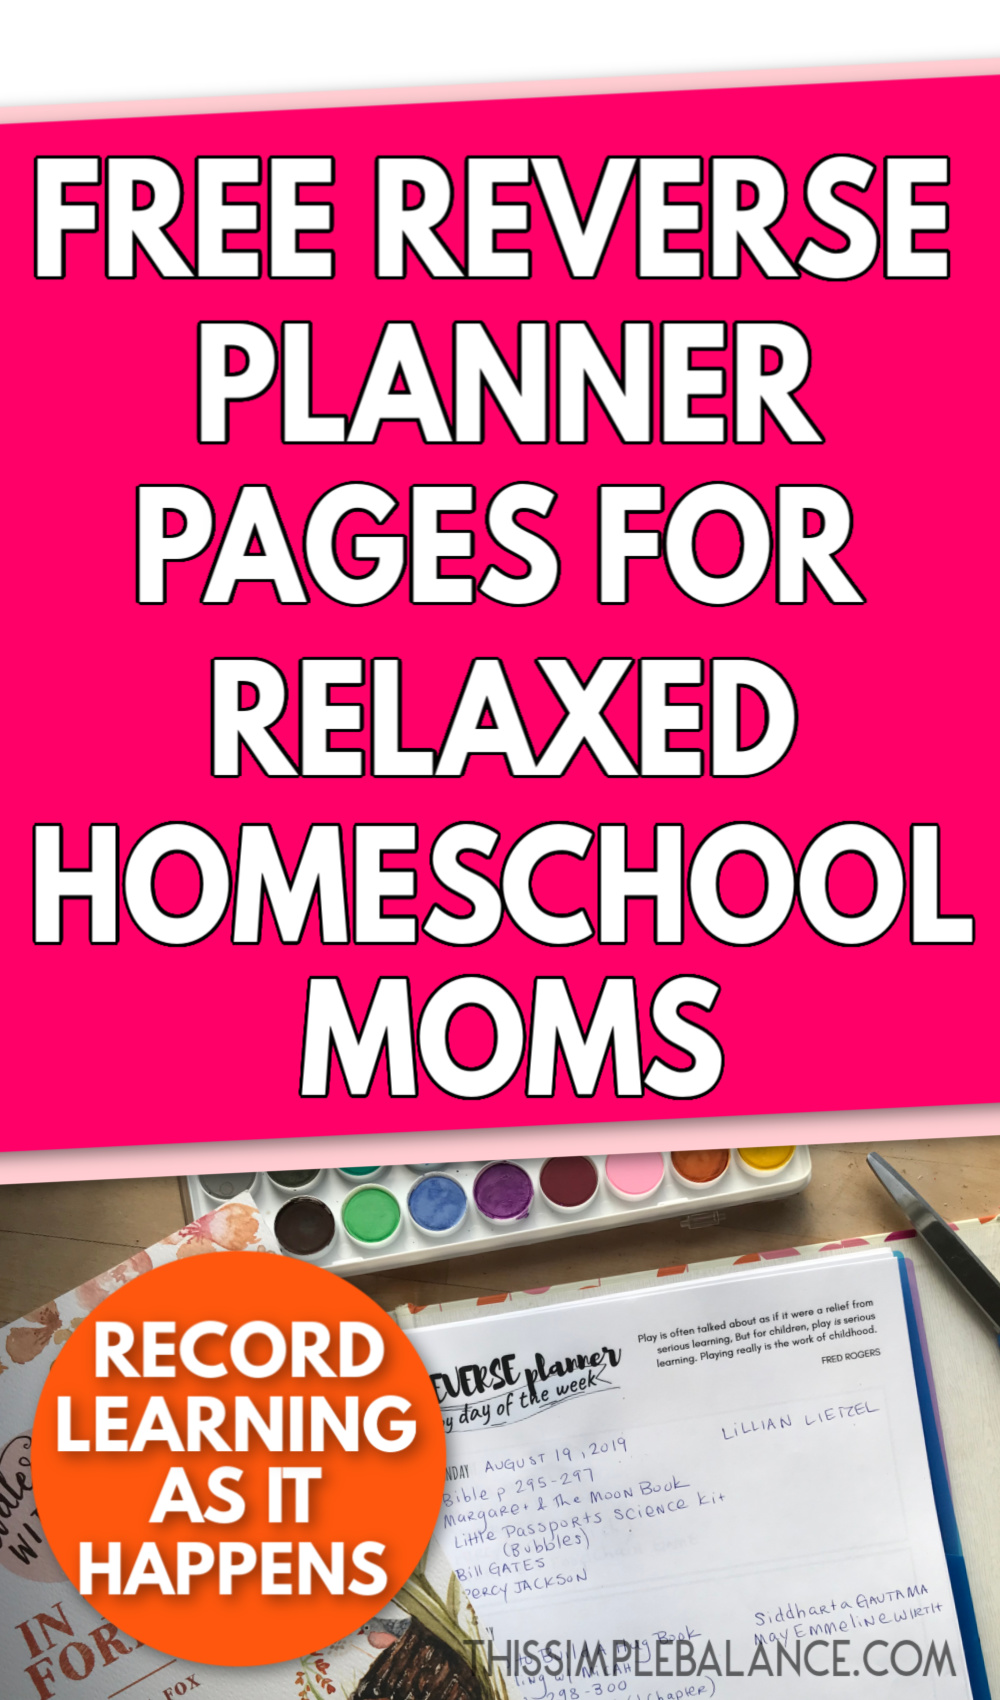 homeschool weekly planner pages with watercolors and book, record of homeschool daily acitivities, with text overlay, "free reverse planner pages for relaxed homeschool moms"